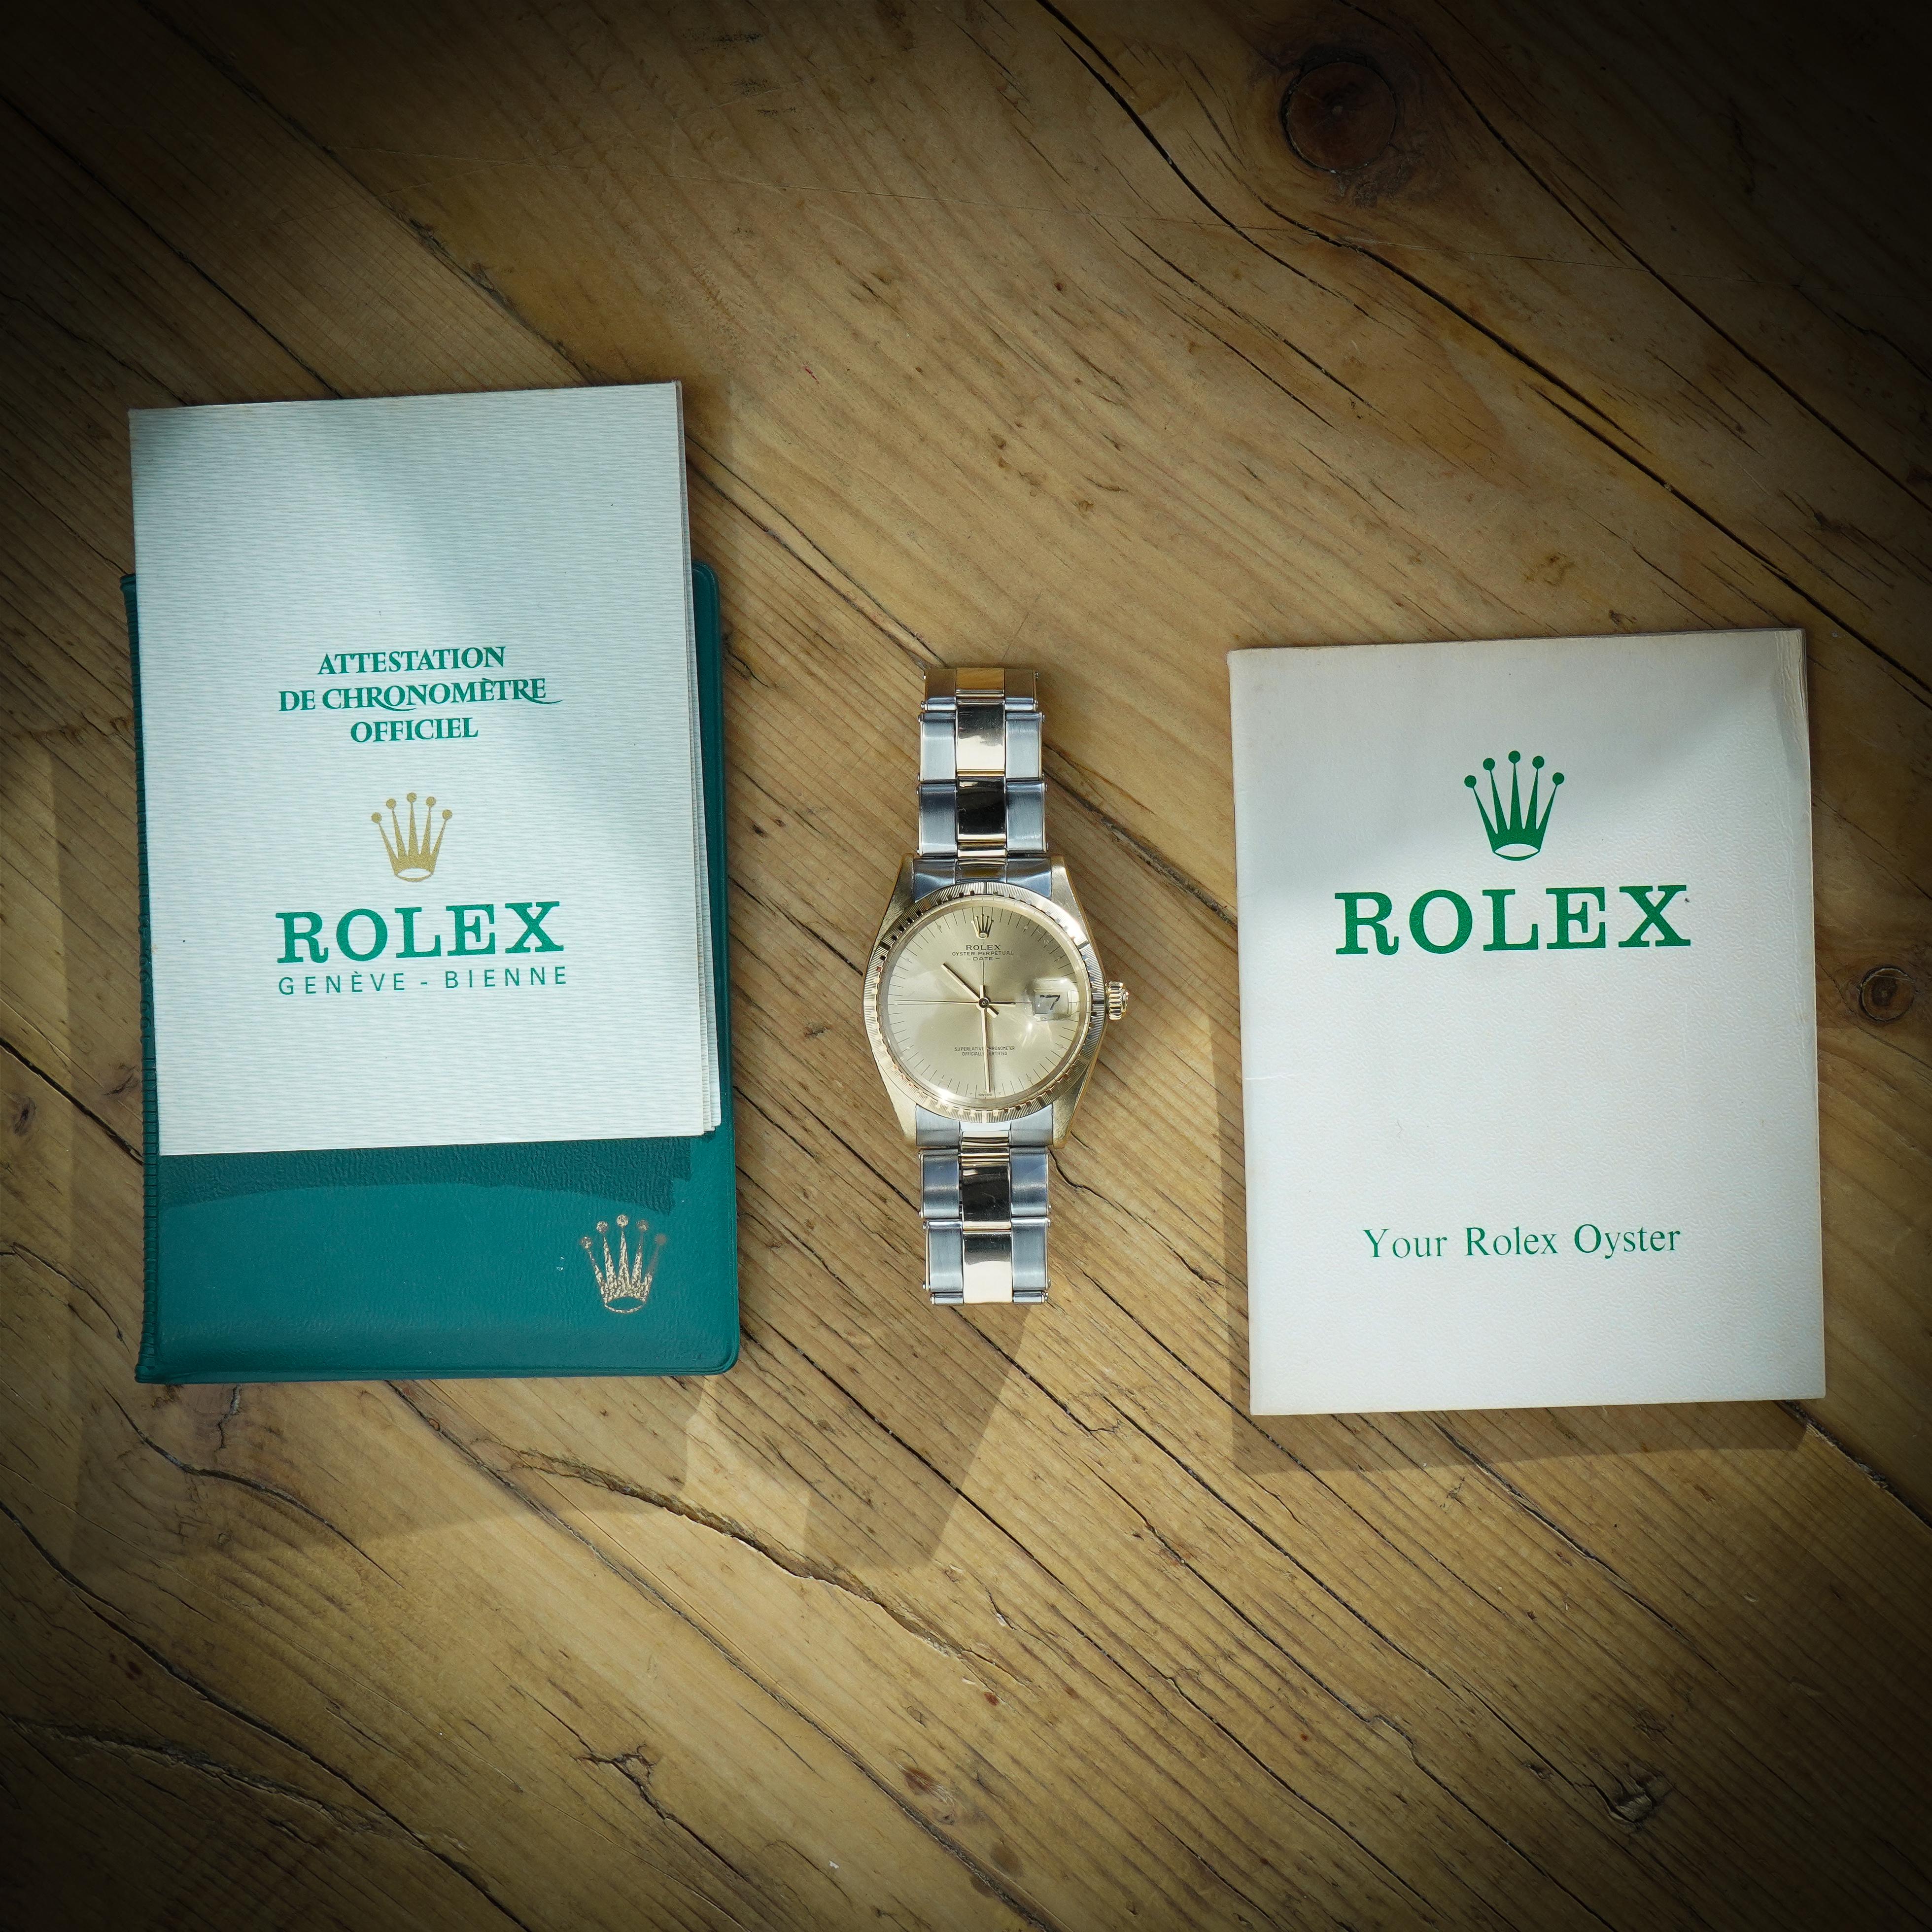 Rolex 14kt. yellow gold and steel Oyster Perpetual Date 1512 
Signed Rolex, Oyster Perpetual Date
Made in Switzerland, Date of purchase, 1990. 

Case Diameter: 34 mm
Crown: Original Rolex 
Dial: signed
Dial: Champagne 
Movement: Automatic Rolex